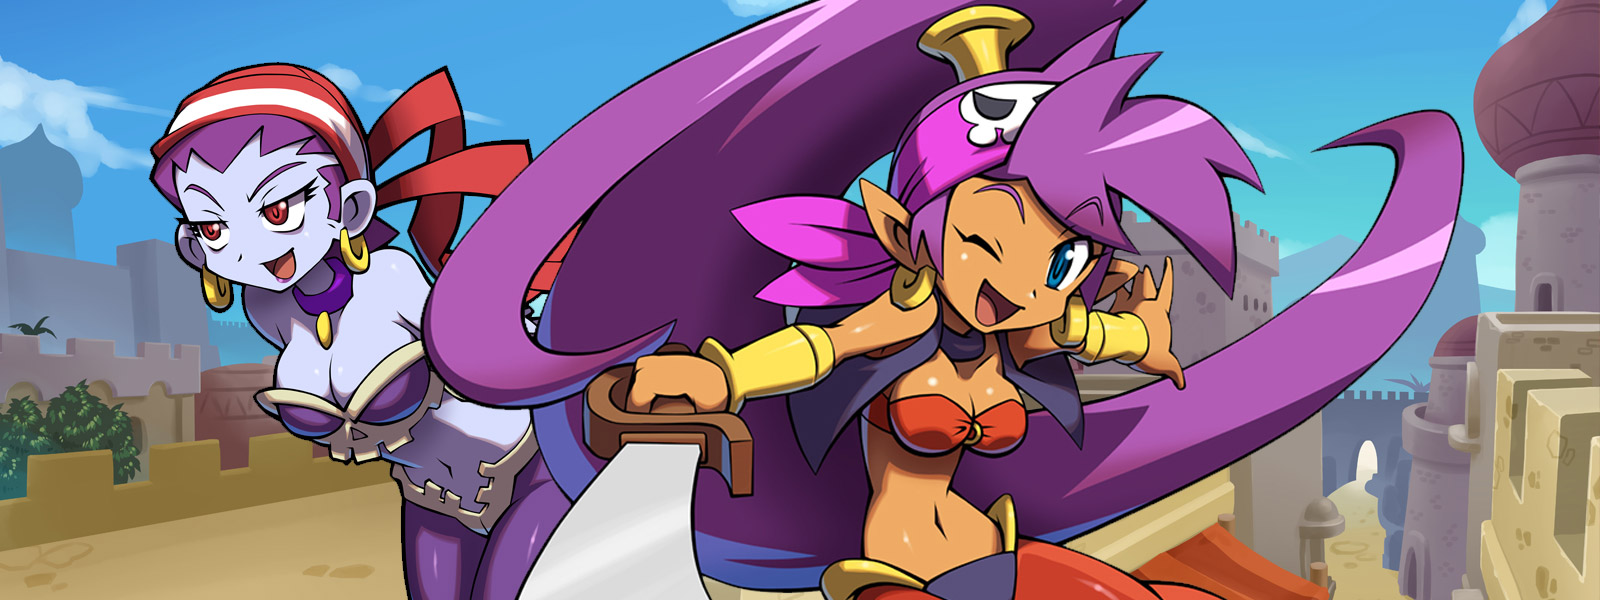 Shantae and the Pirate’s Curse – Recensione